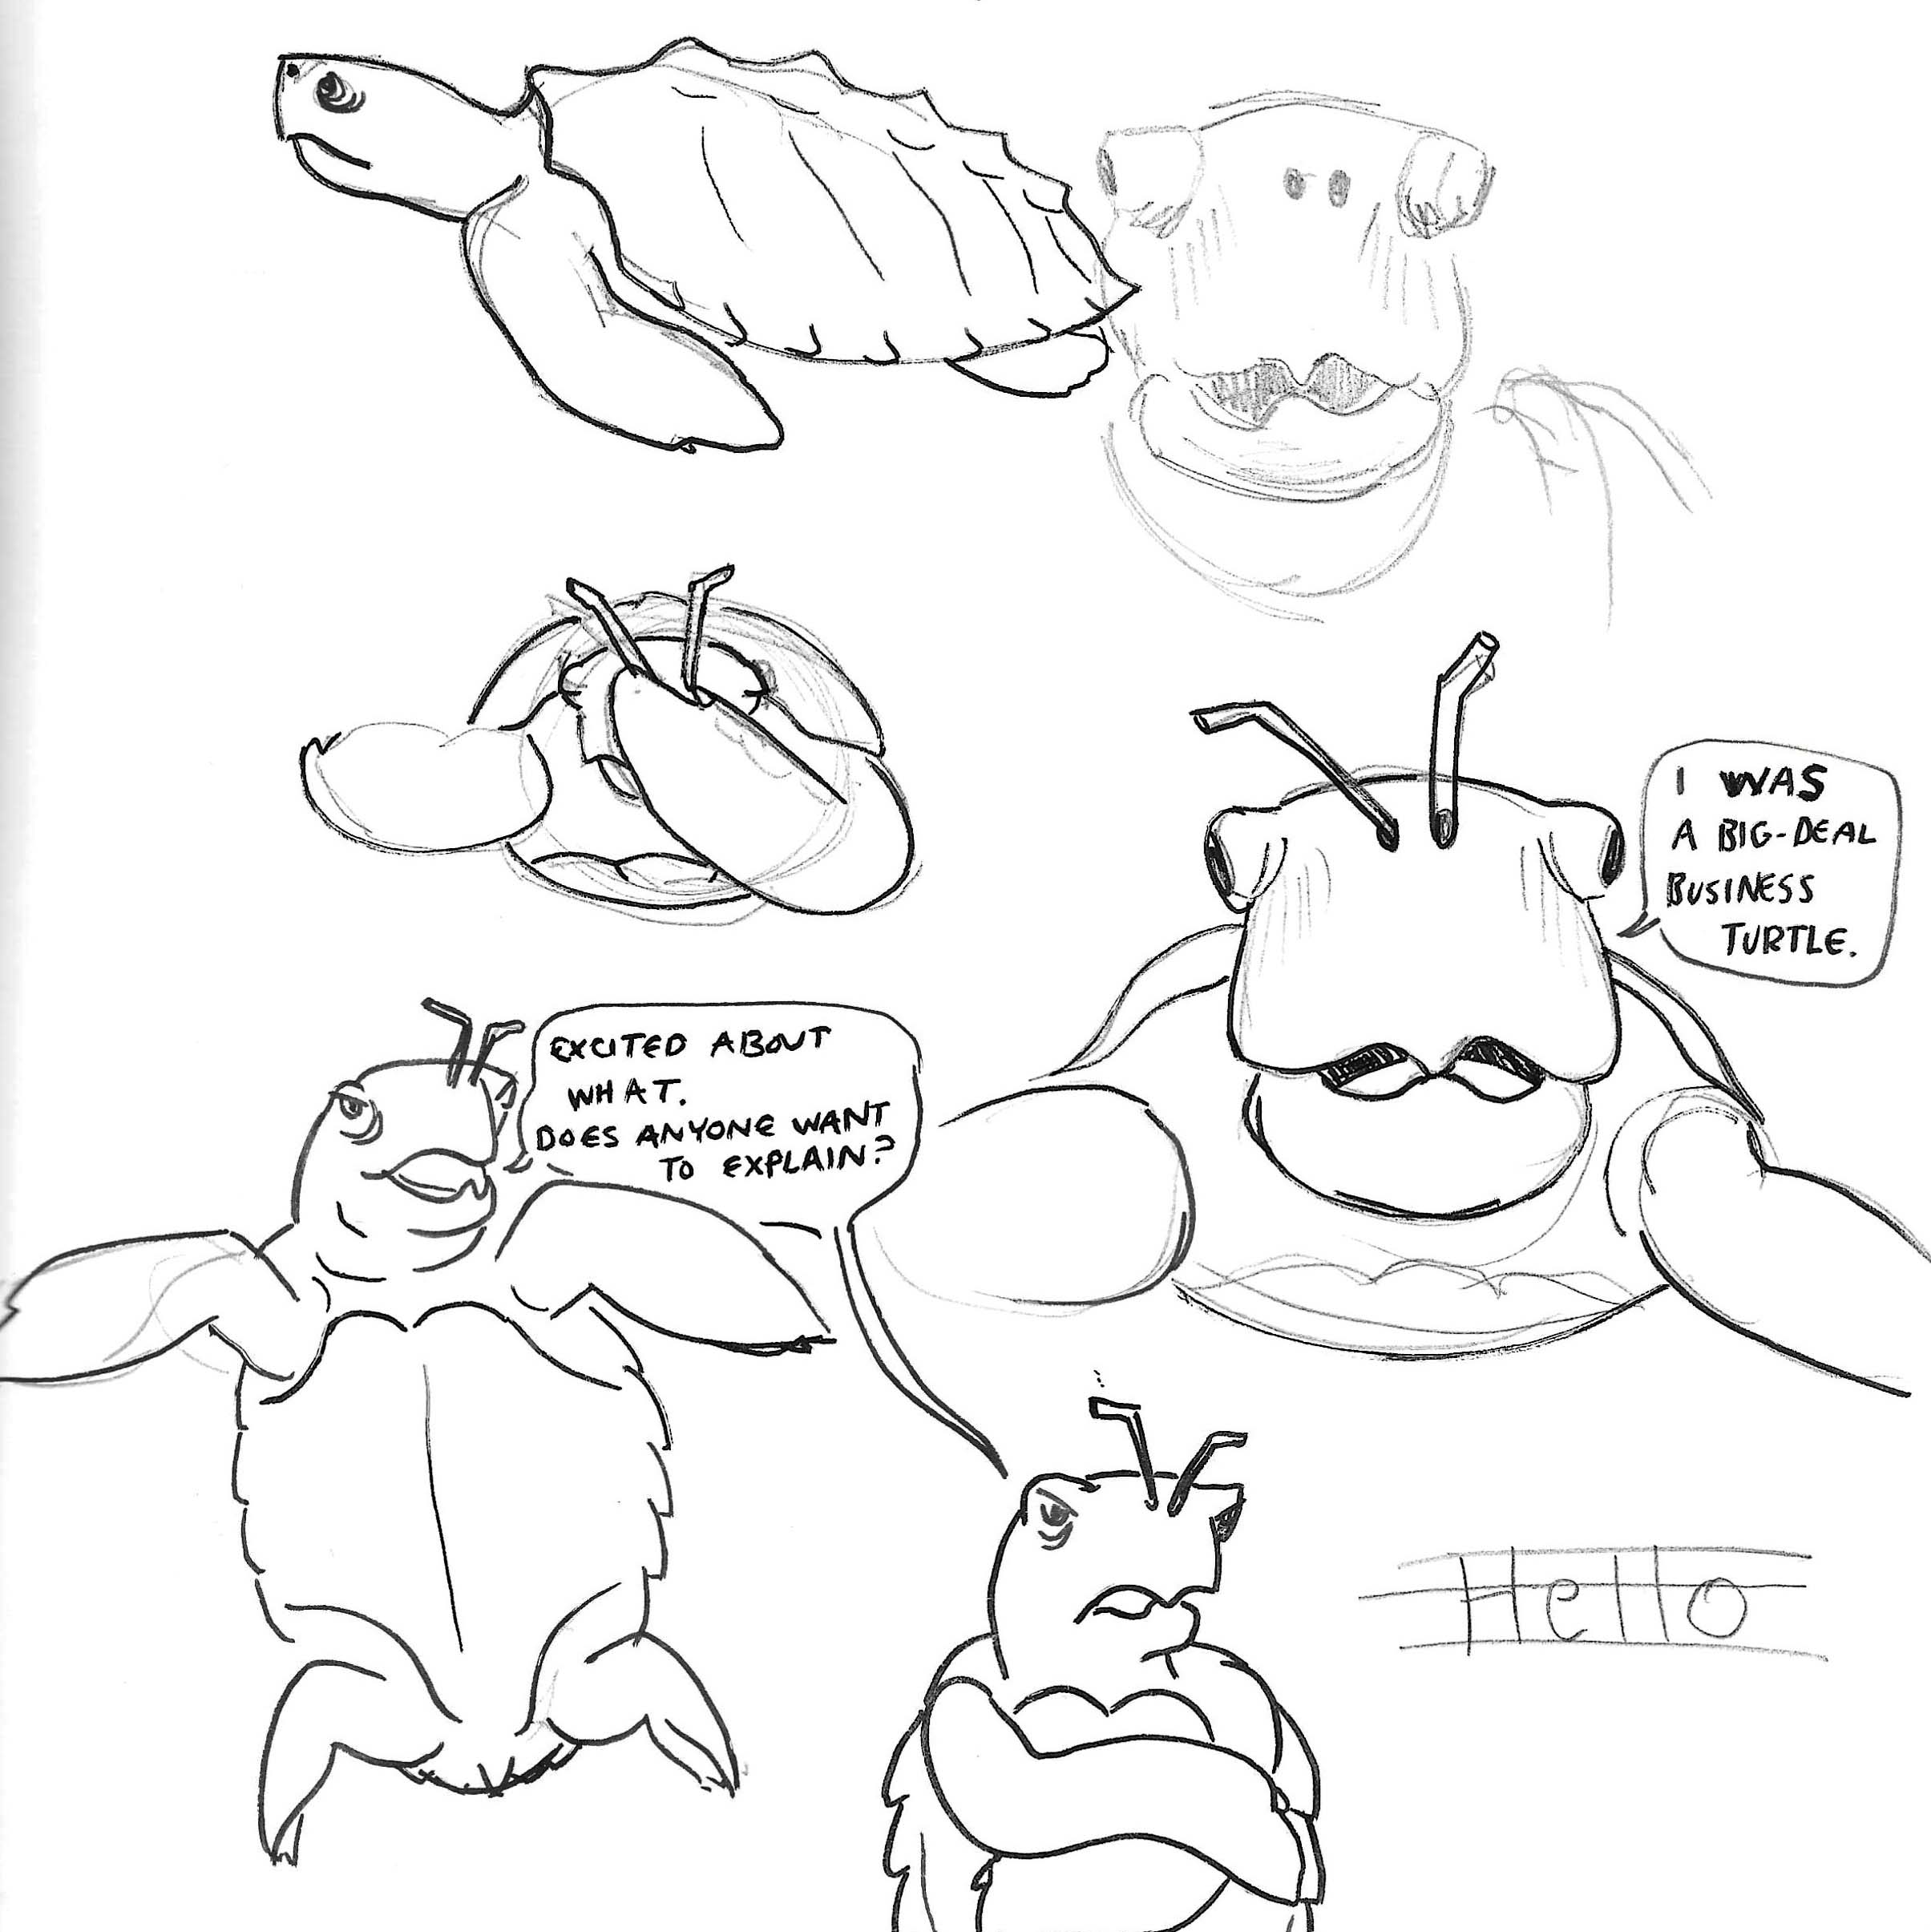 Black and white character sketches of Jack the sea turtle